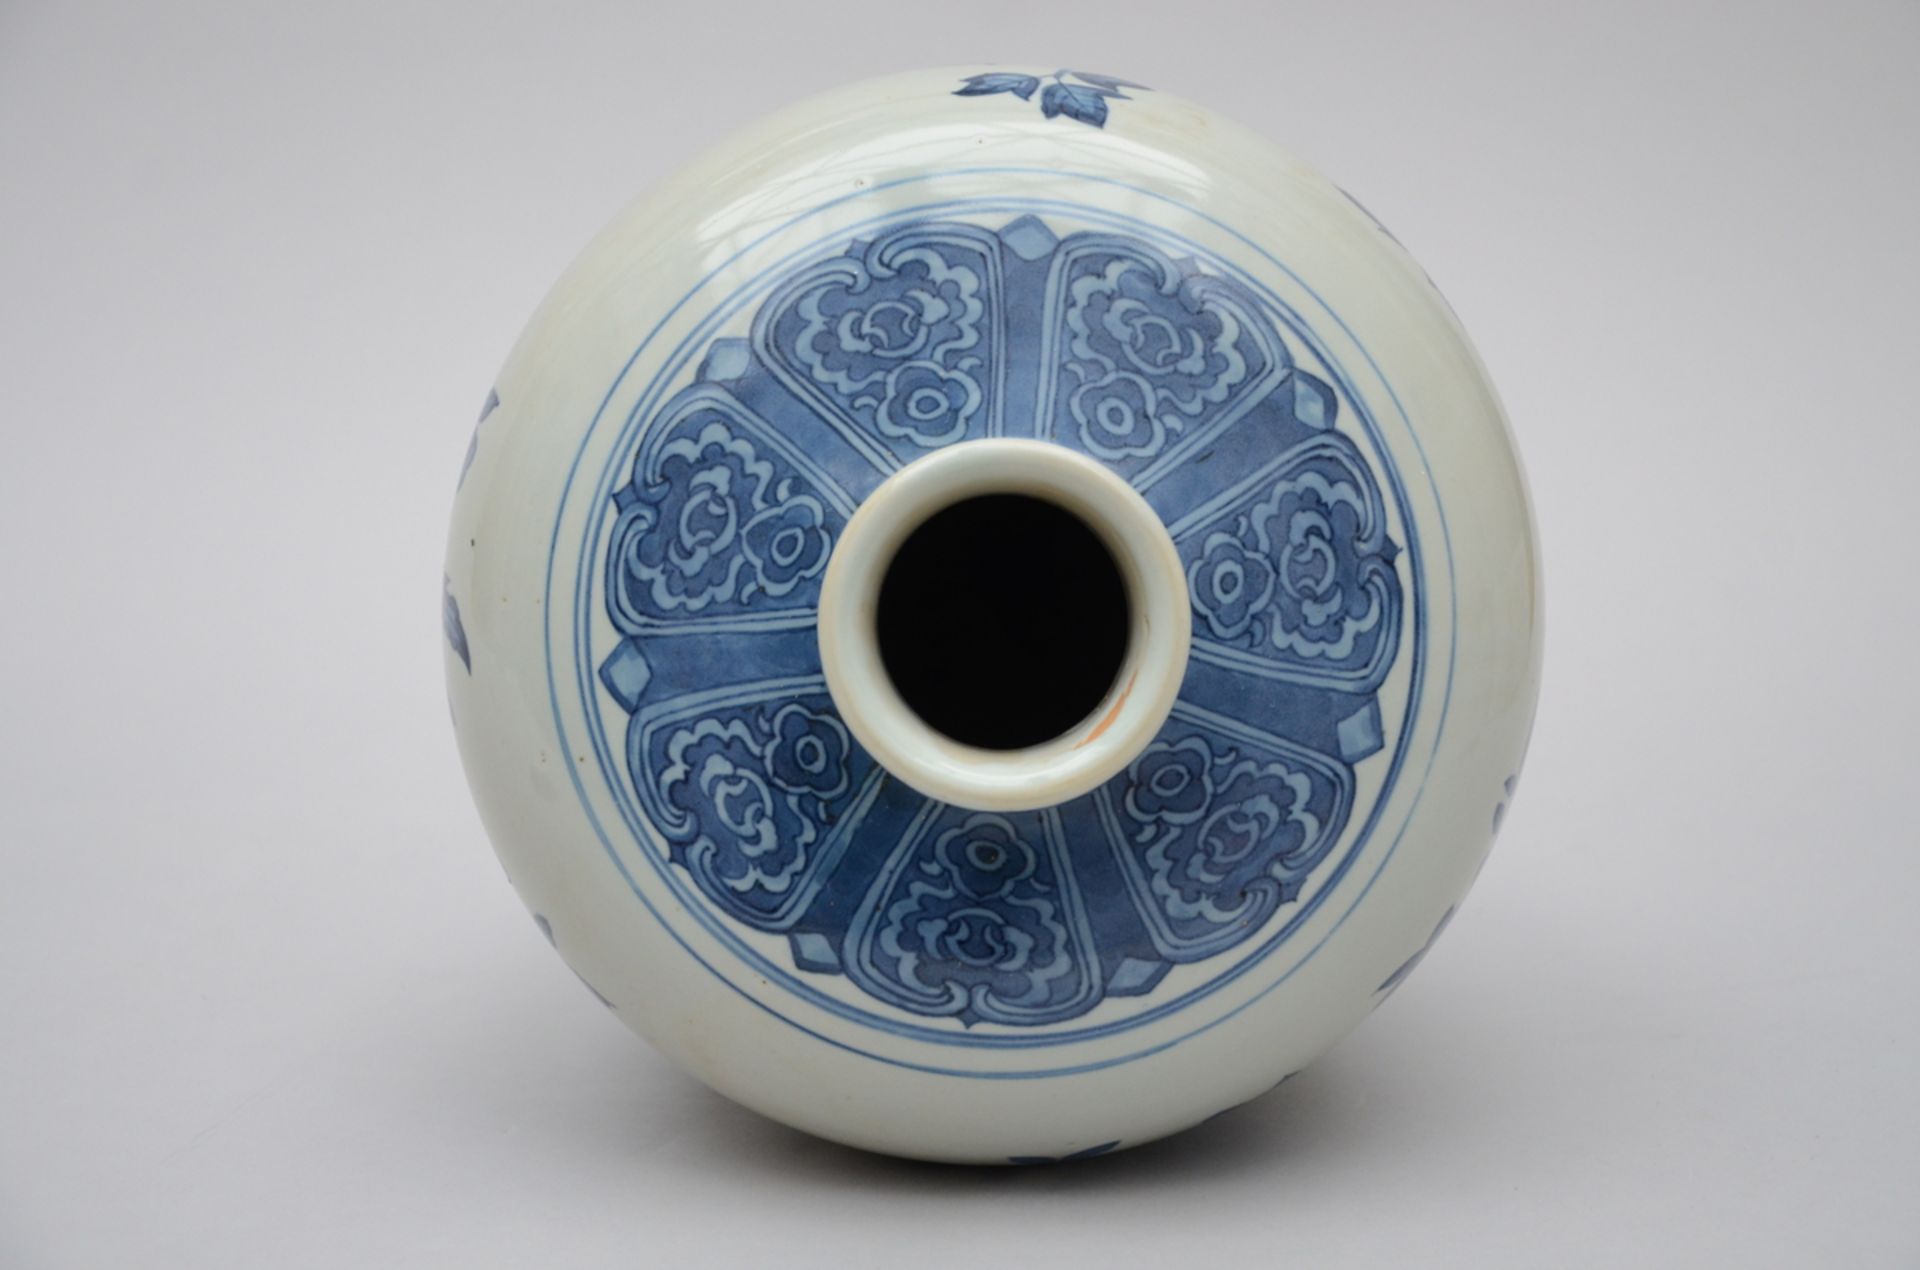 Chinese Meiping vase in blue and white porcelain, 20th century (38 cm) - Image 3 of 4